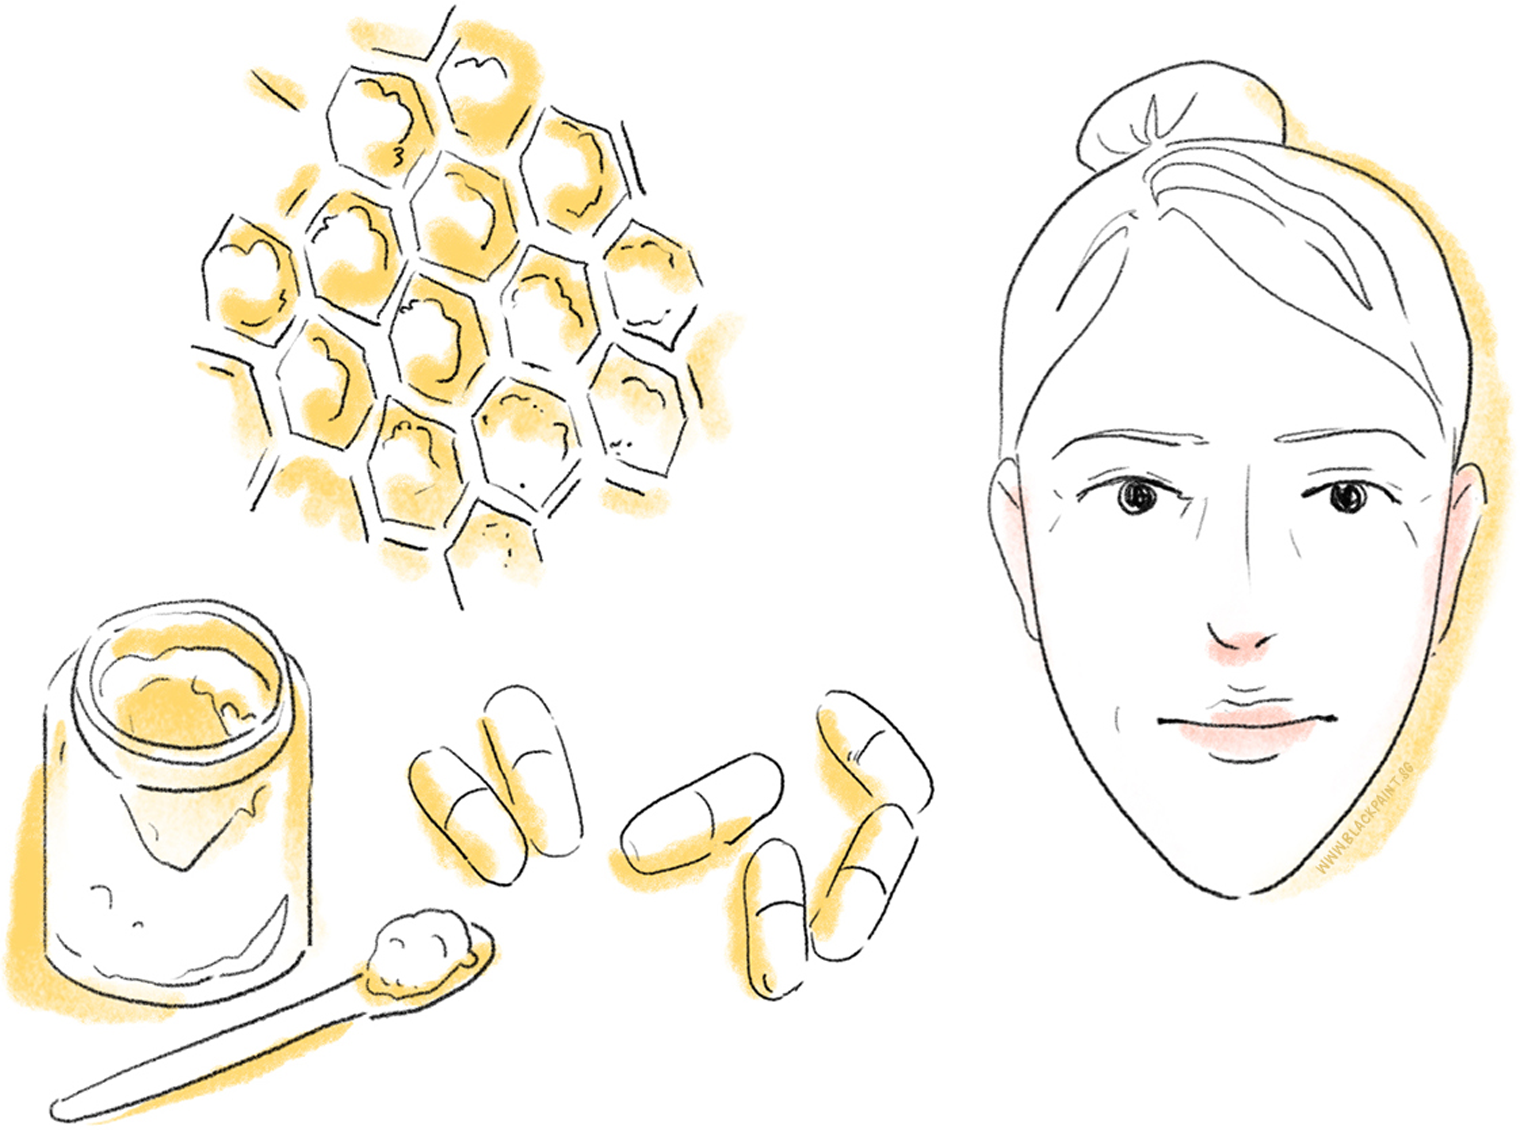 illustration of royal jelly being well known as an ingredient for anti-aging